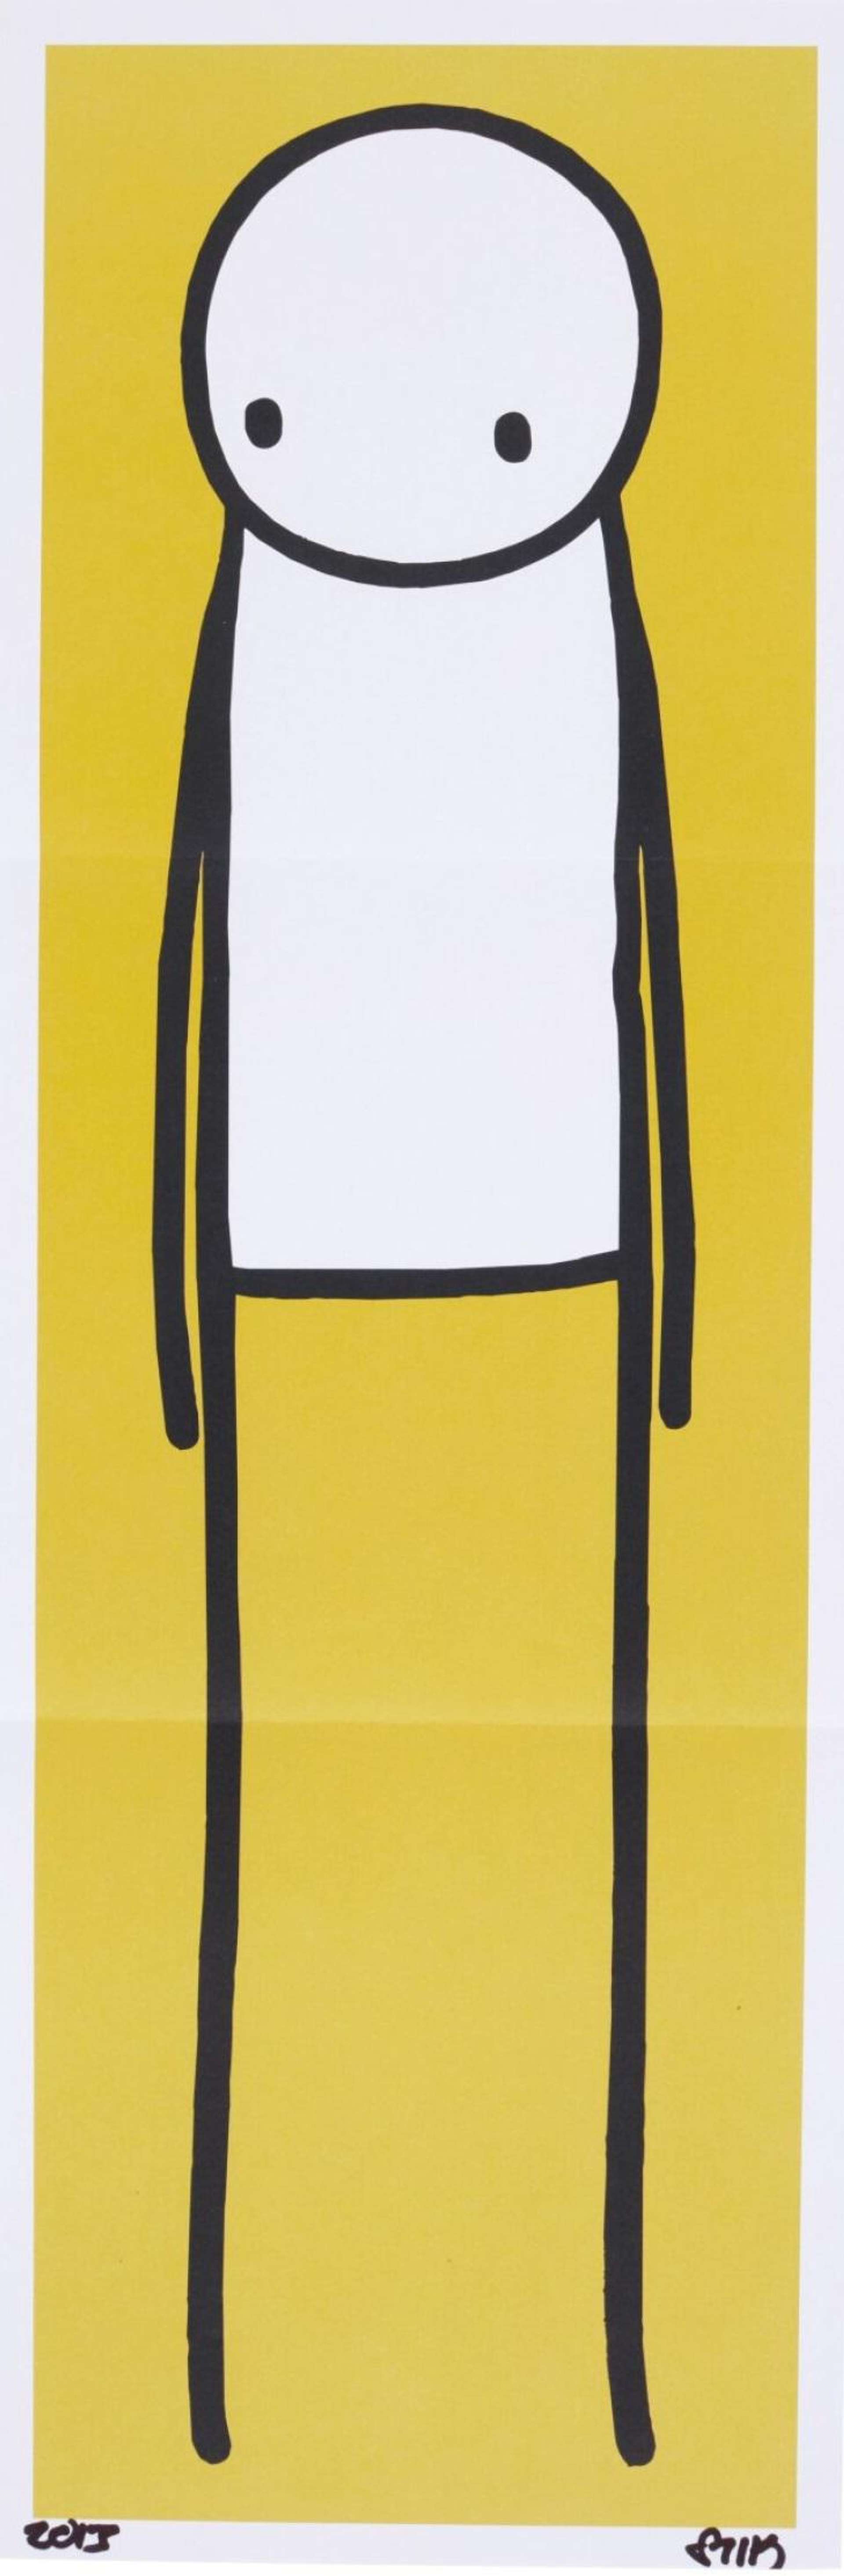 The Big Issue (yellow) - Signed Print by Stik 2013 - MyArtBroker